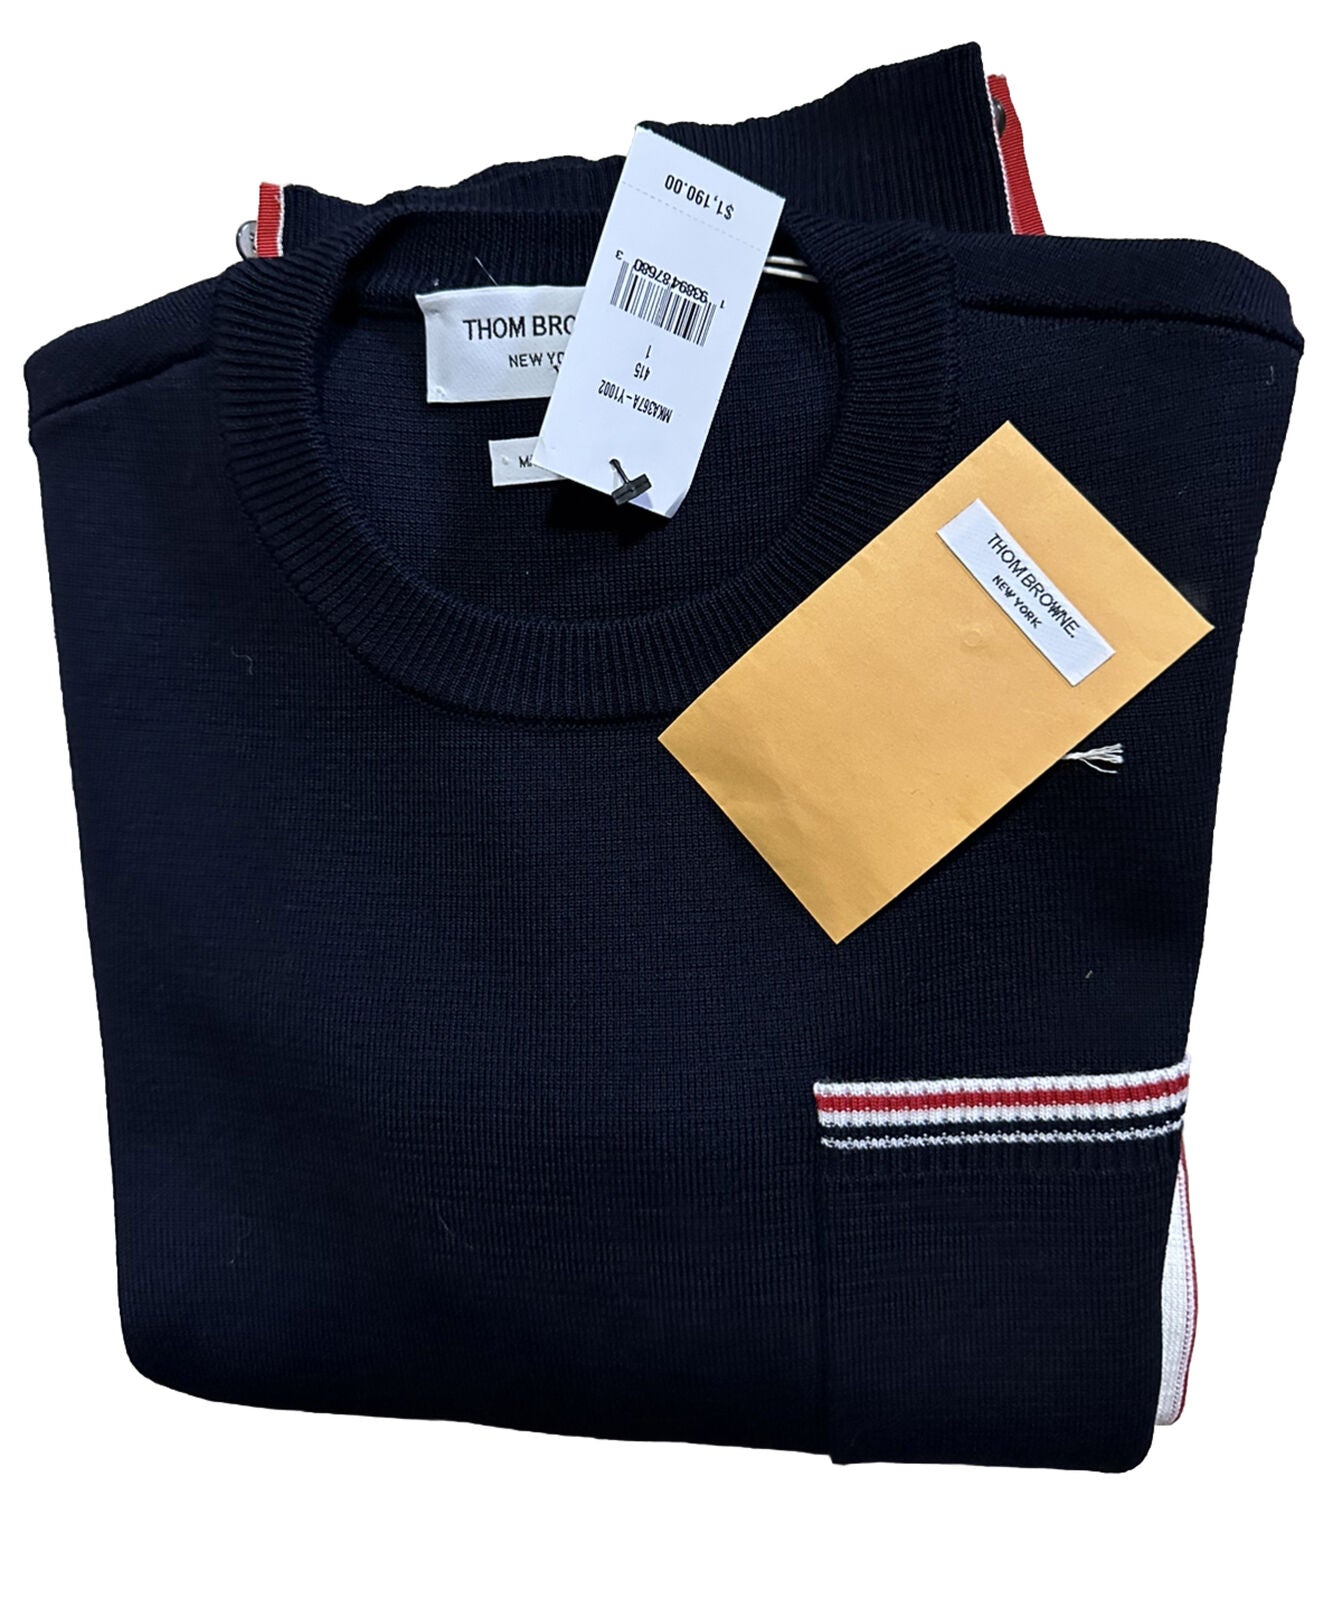 NWT $1190 Thom Browne Men’s Patch Pocket Merino Wool Blend Sweater 1 ( S ) Italy